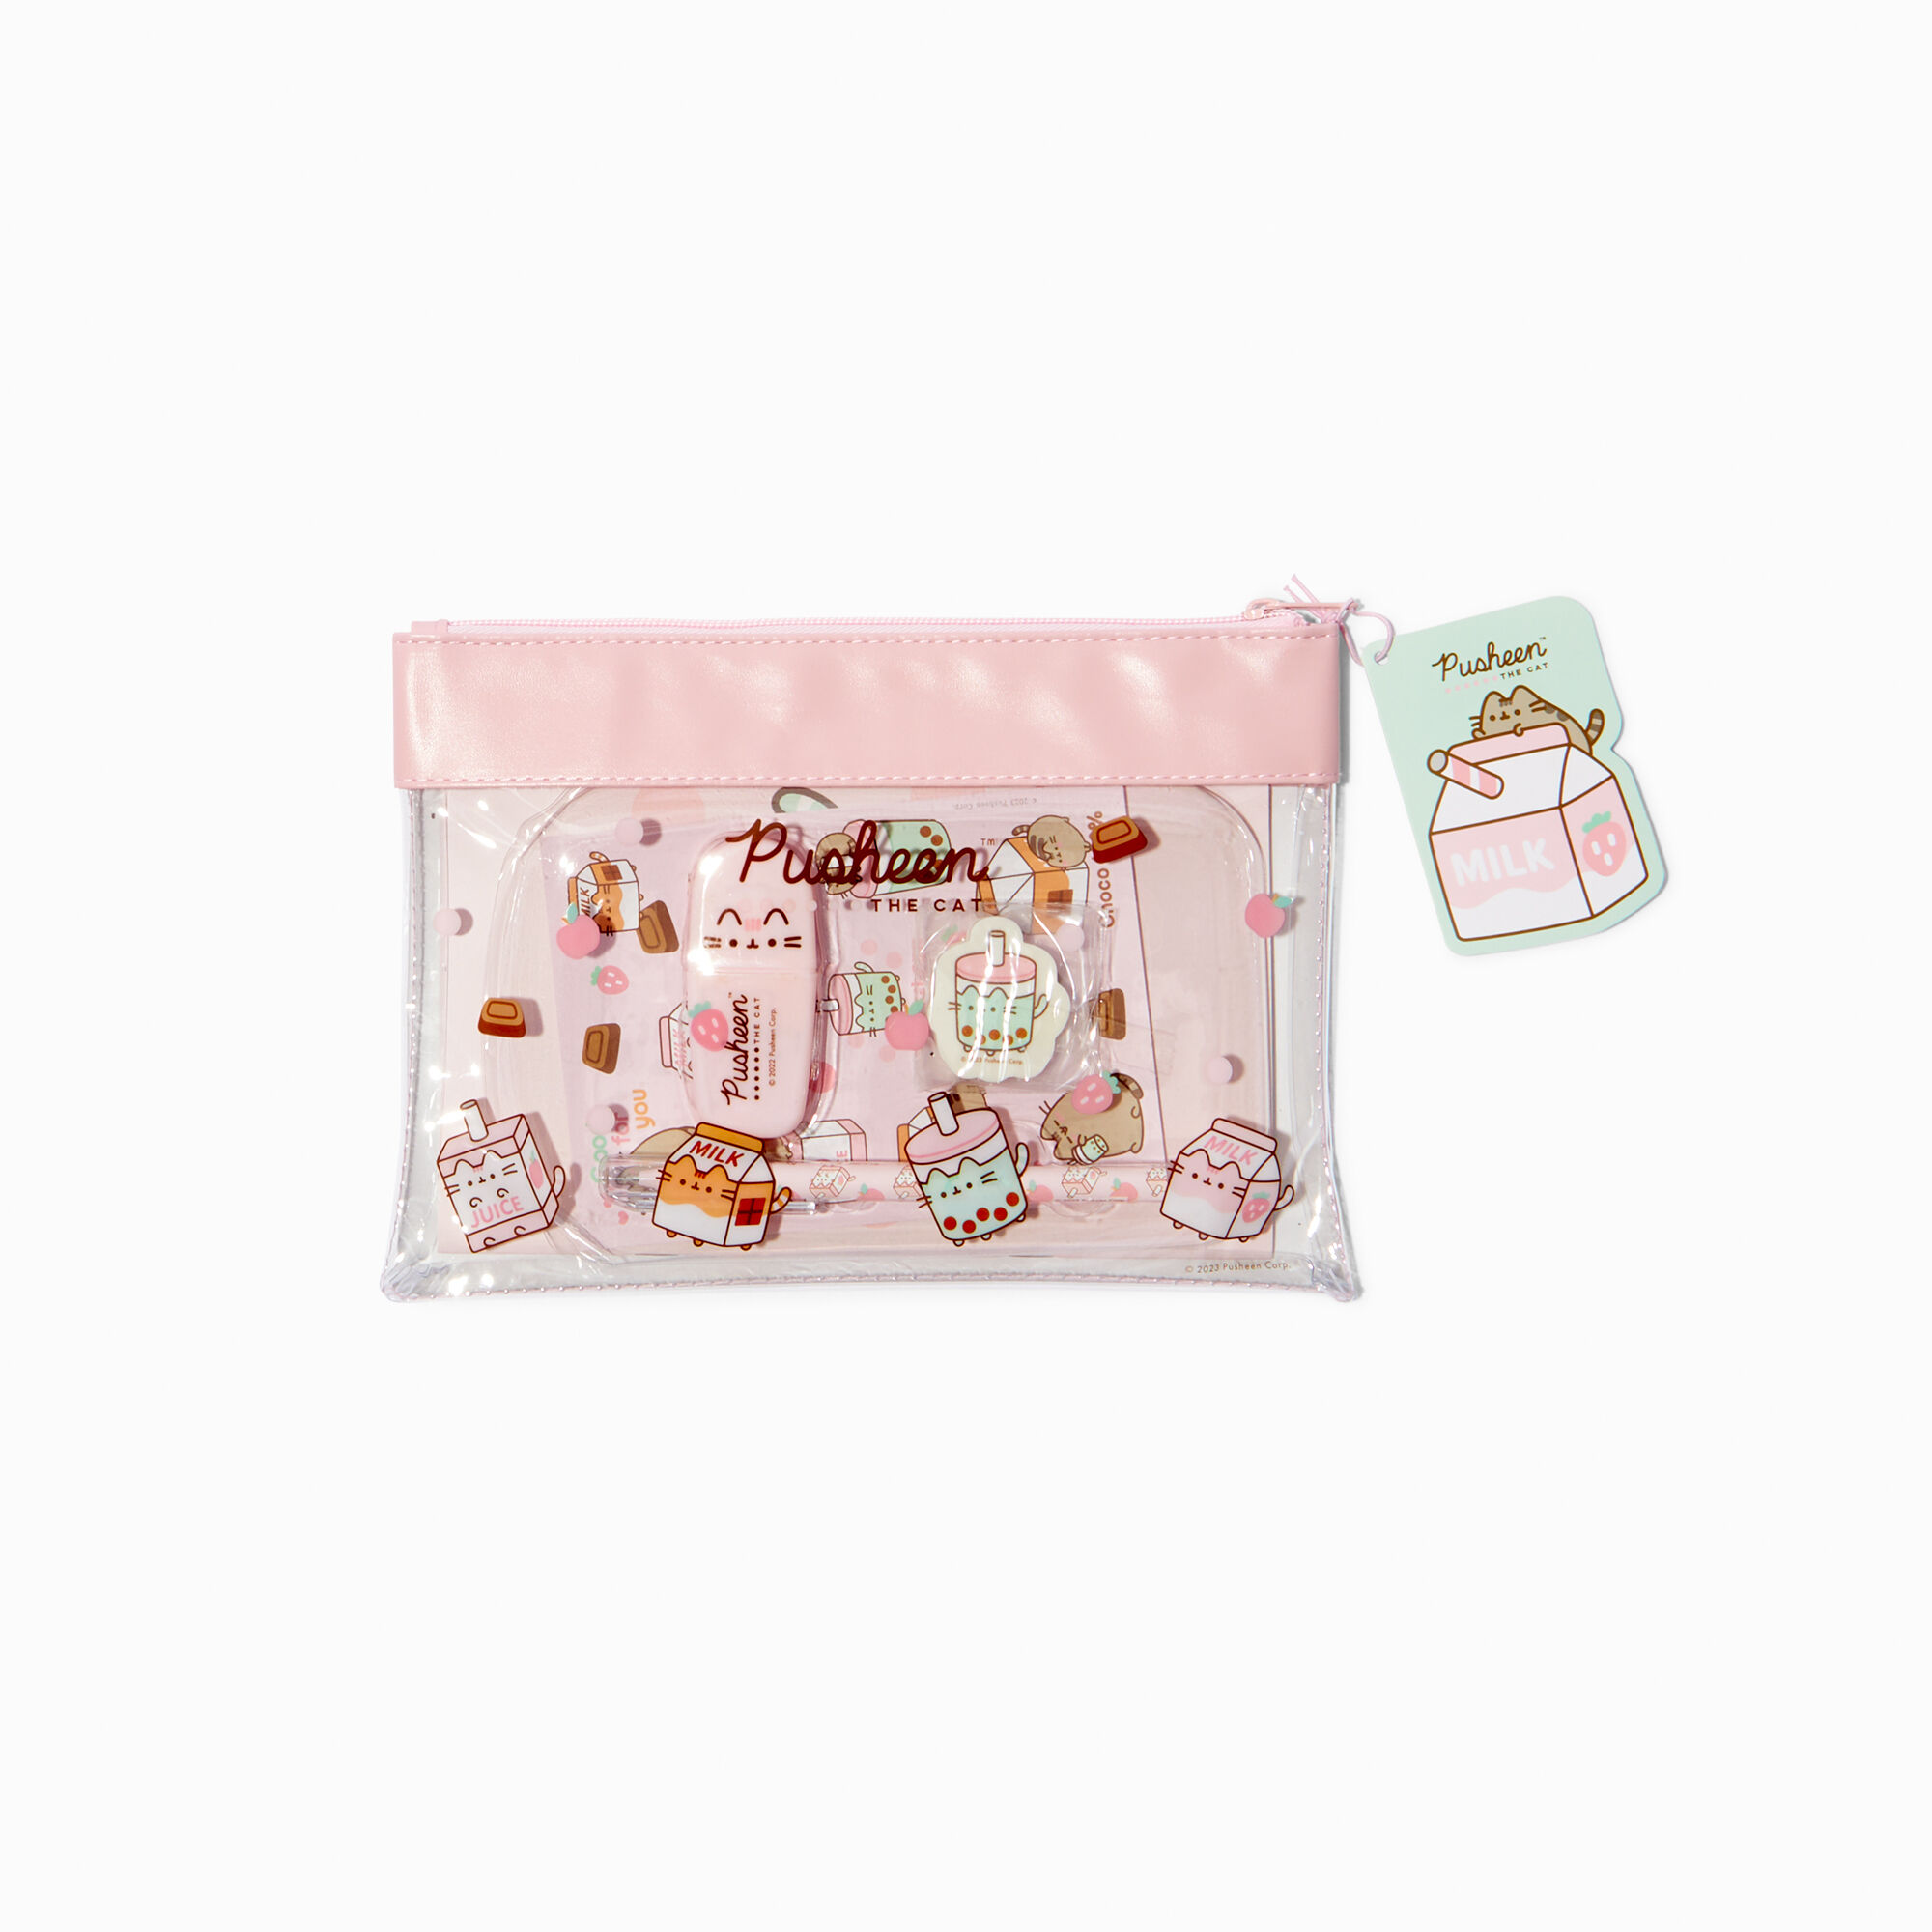 View Claires Pusheen Sips Stationery Set information